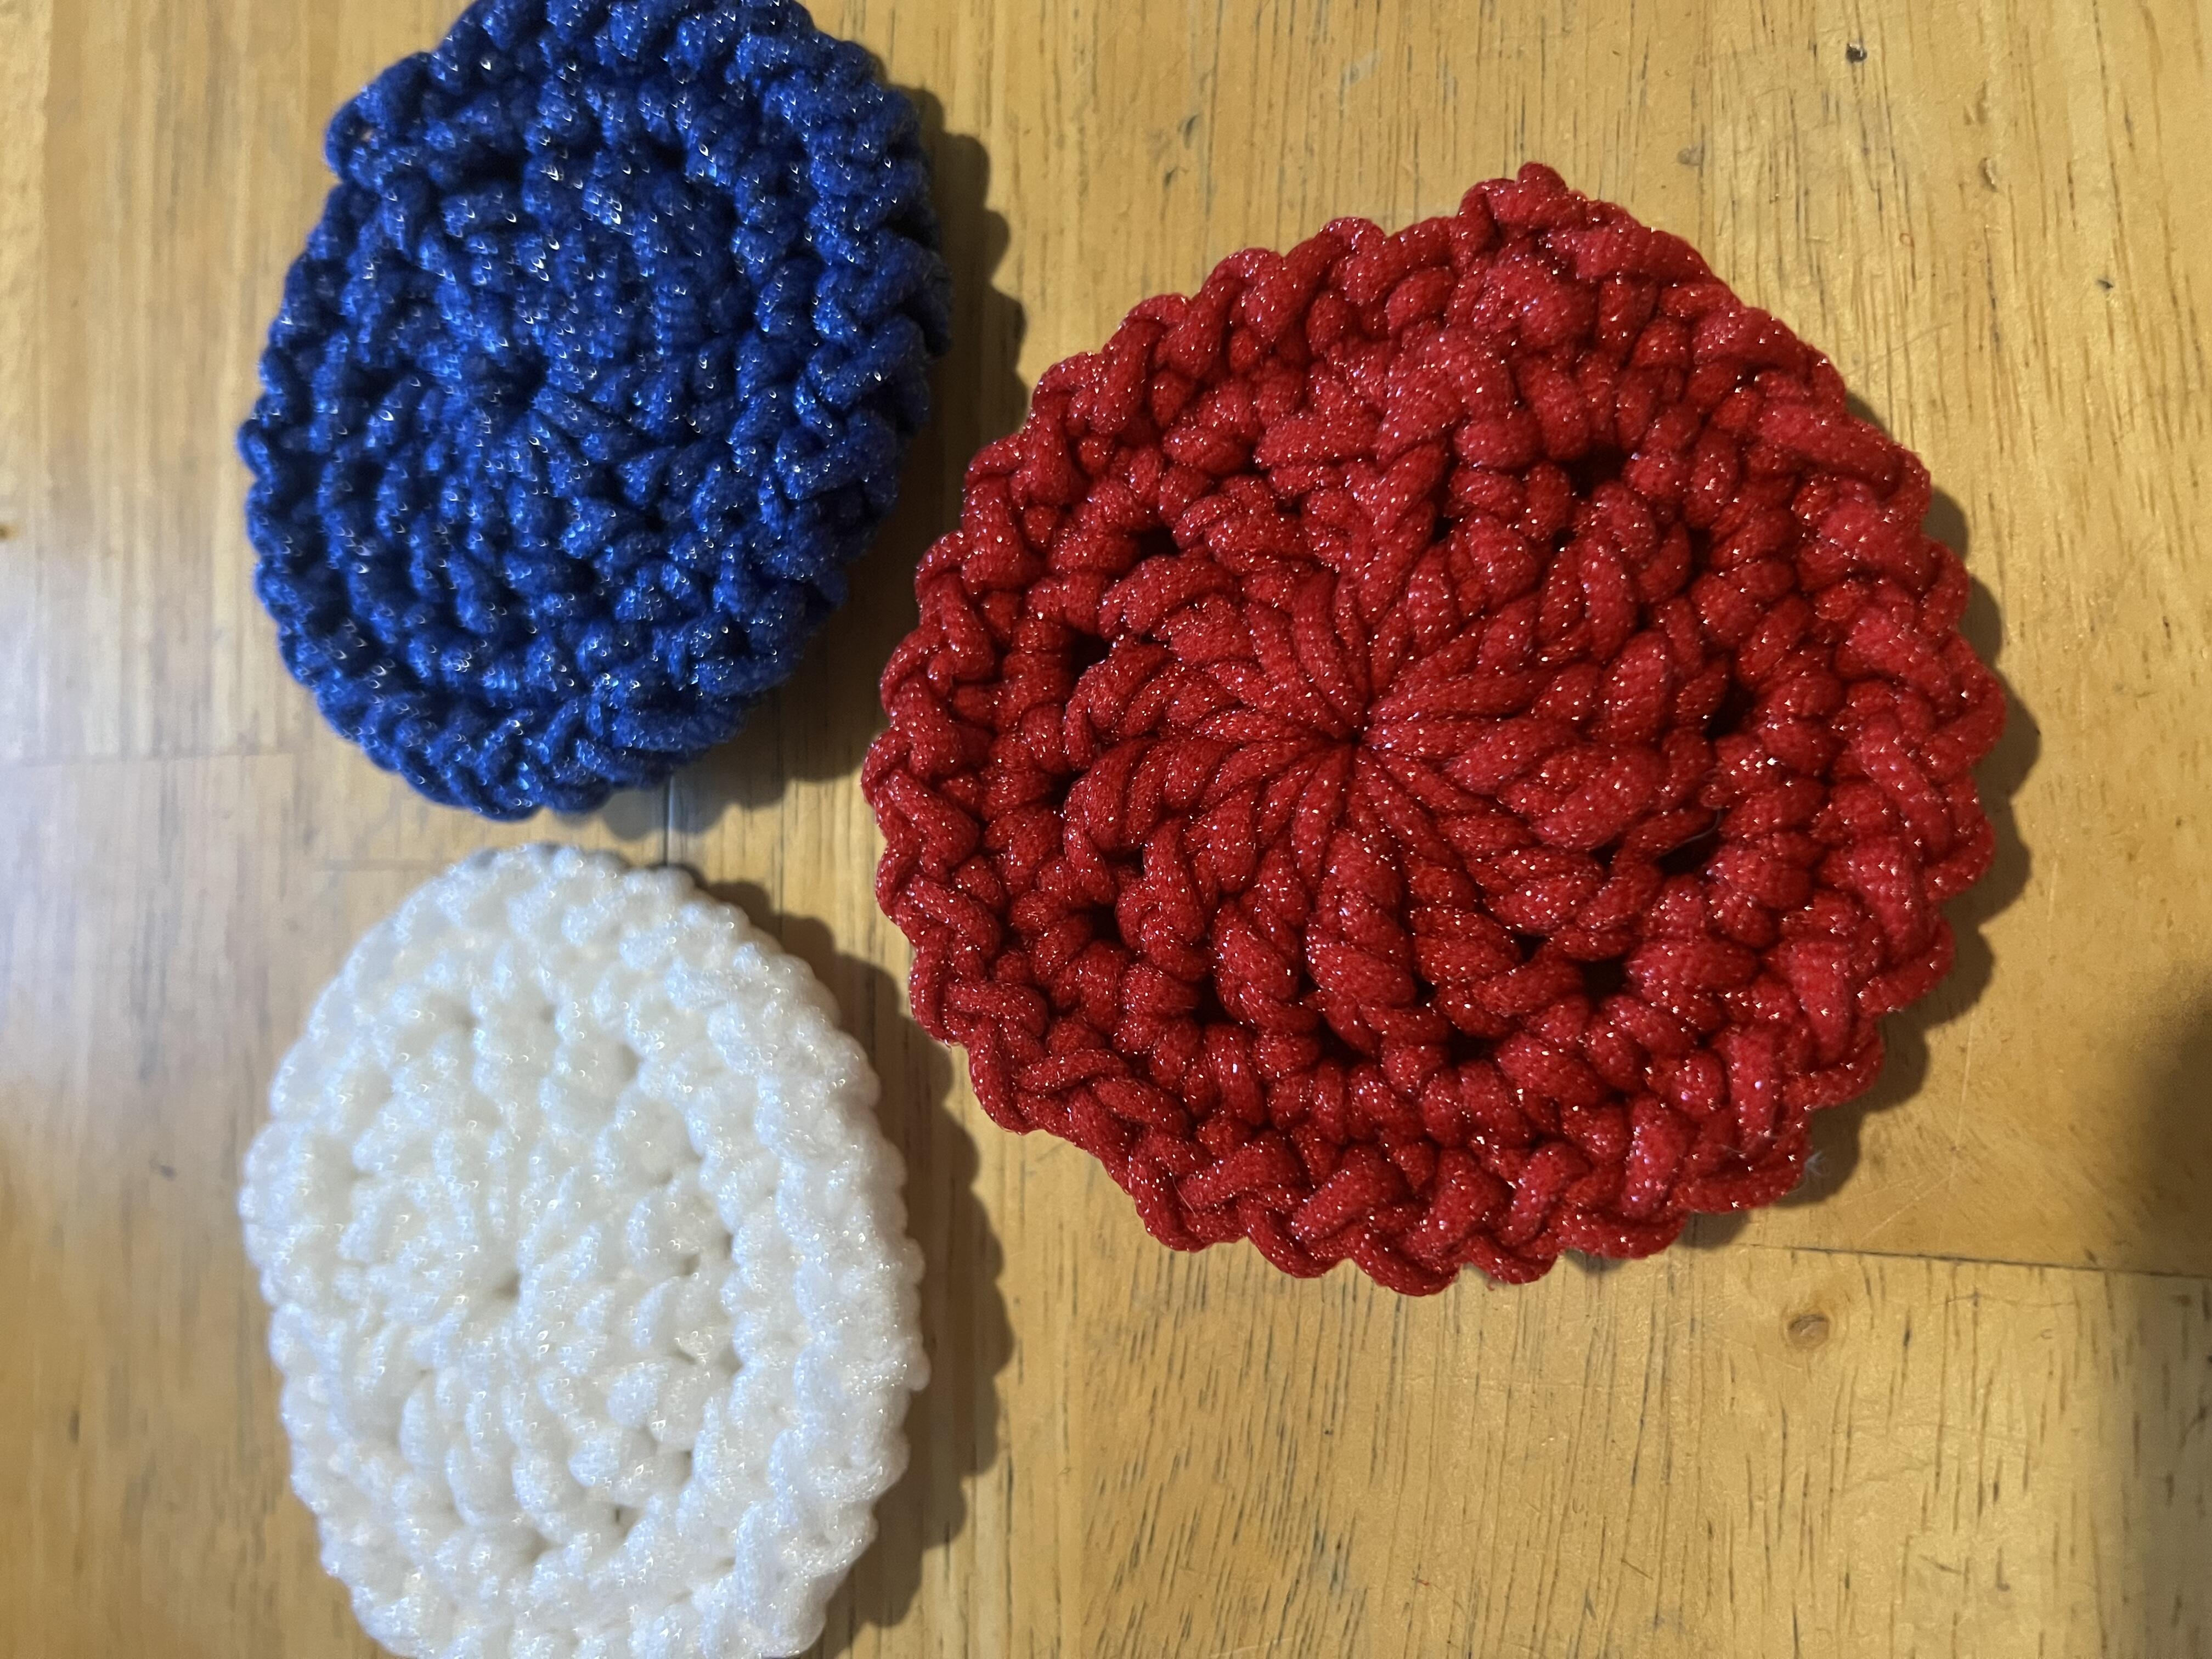 Fourth of July set of scrubbies